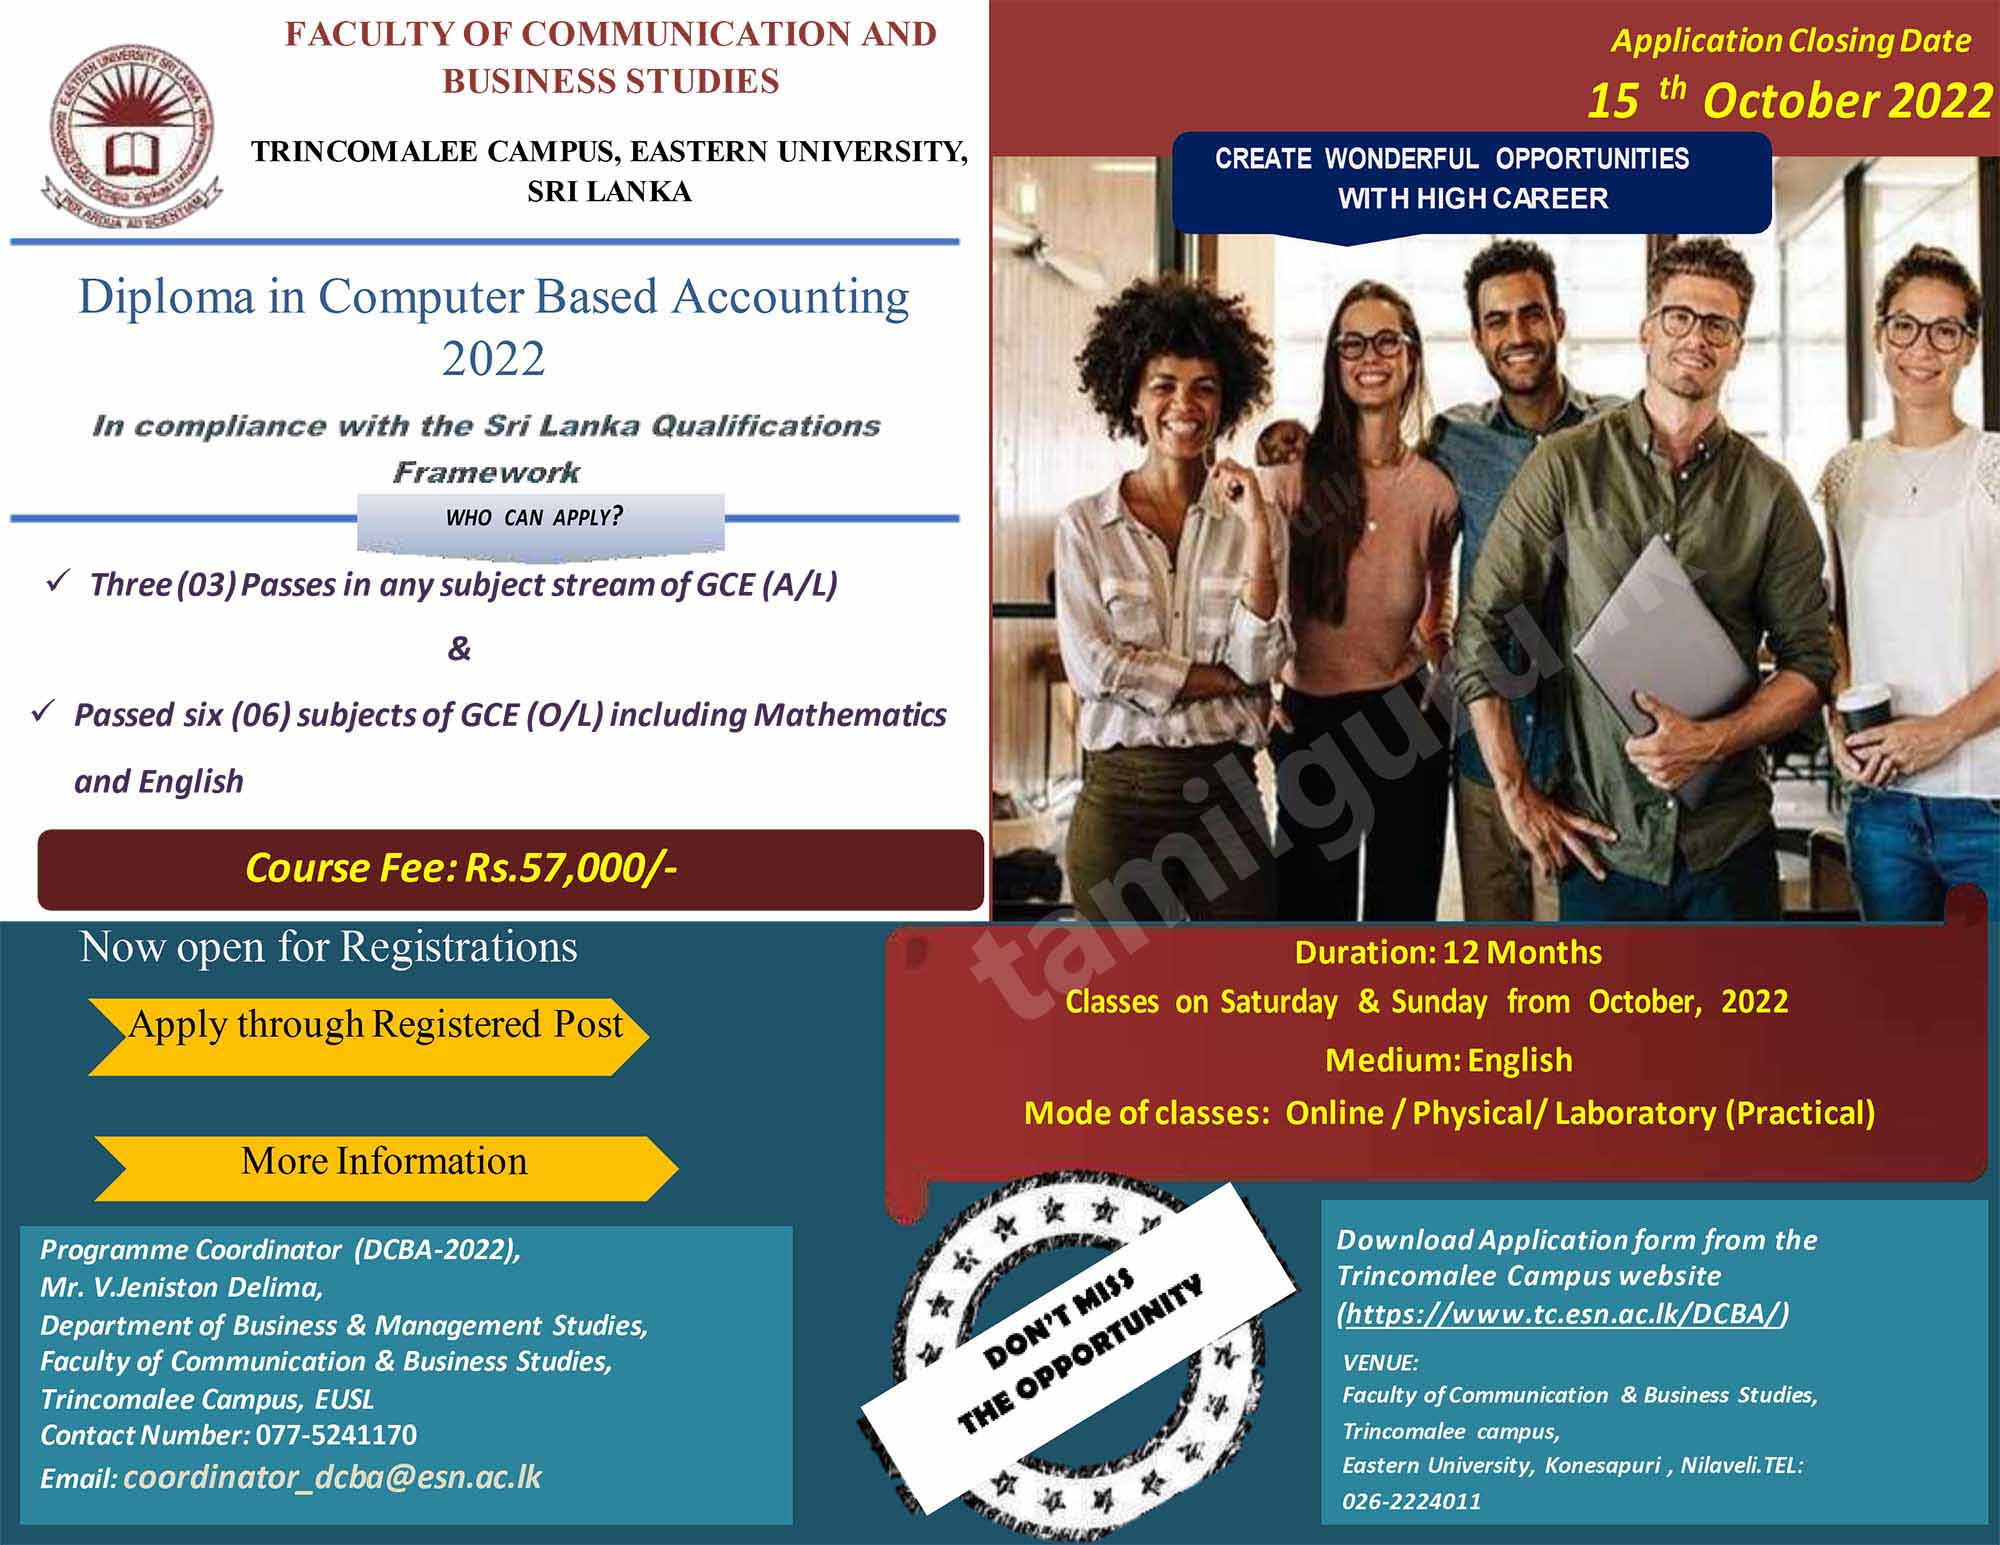 Call for Applications - Diploma in Computer Based Accounting (DCBA) 2022 - Trincomalee Campus, Eastern University, Sri Lanka (EUSL)